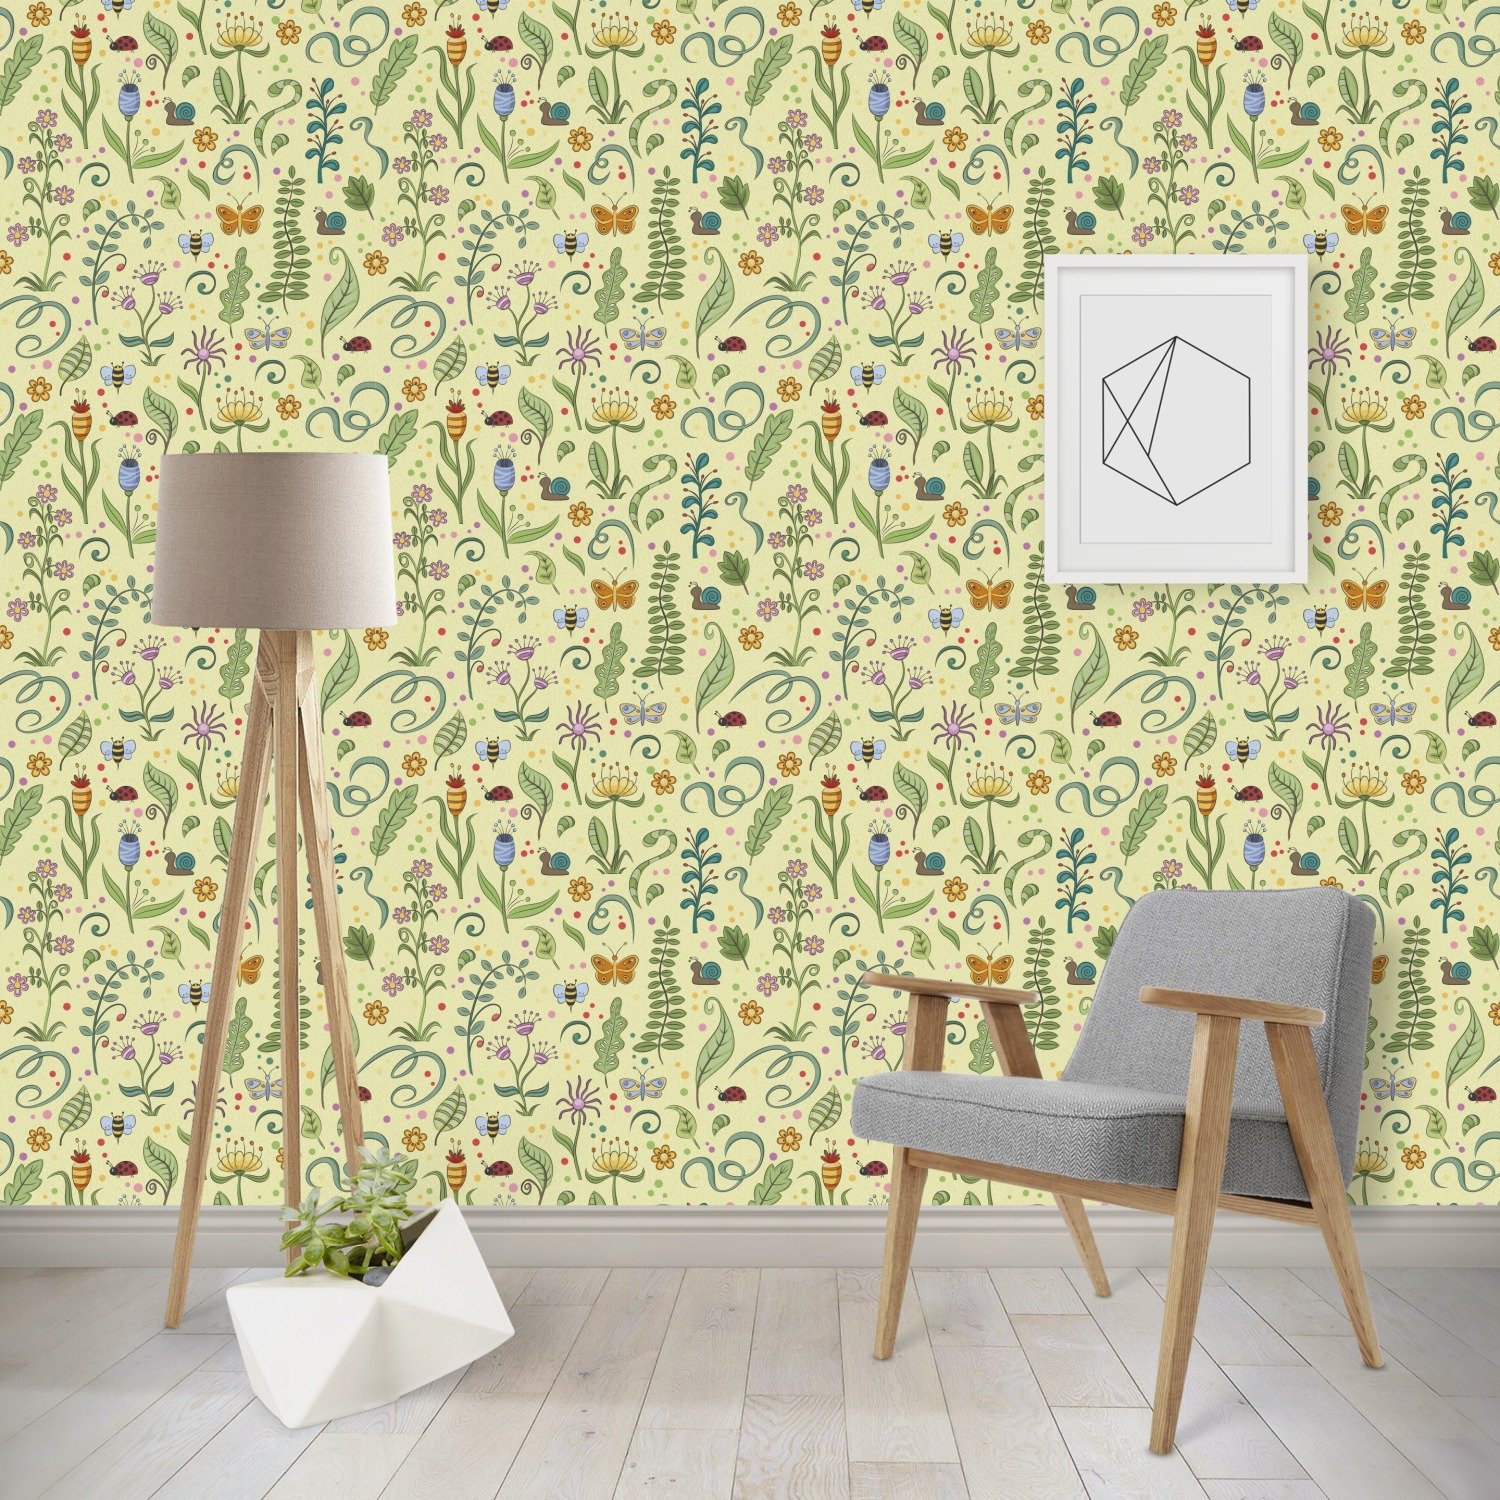 Rnk Shops Nature Inspired Wallpaper & Surface Covering - Office Wall Paper Texture , HD Wallpaper & Backgrounds